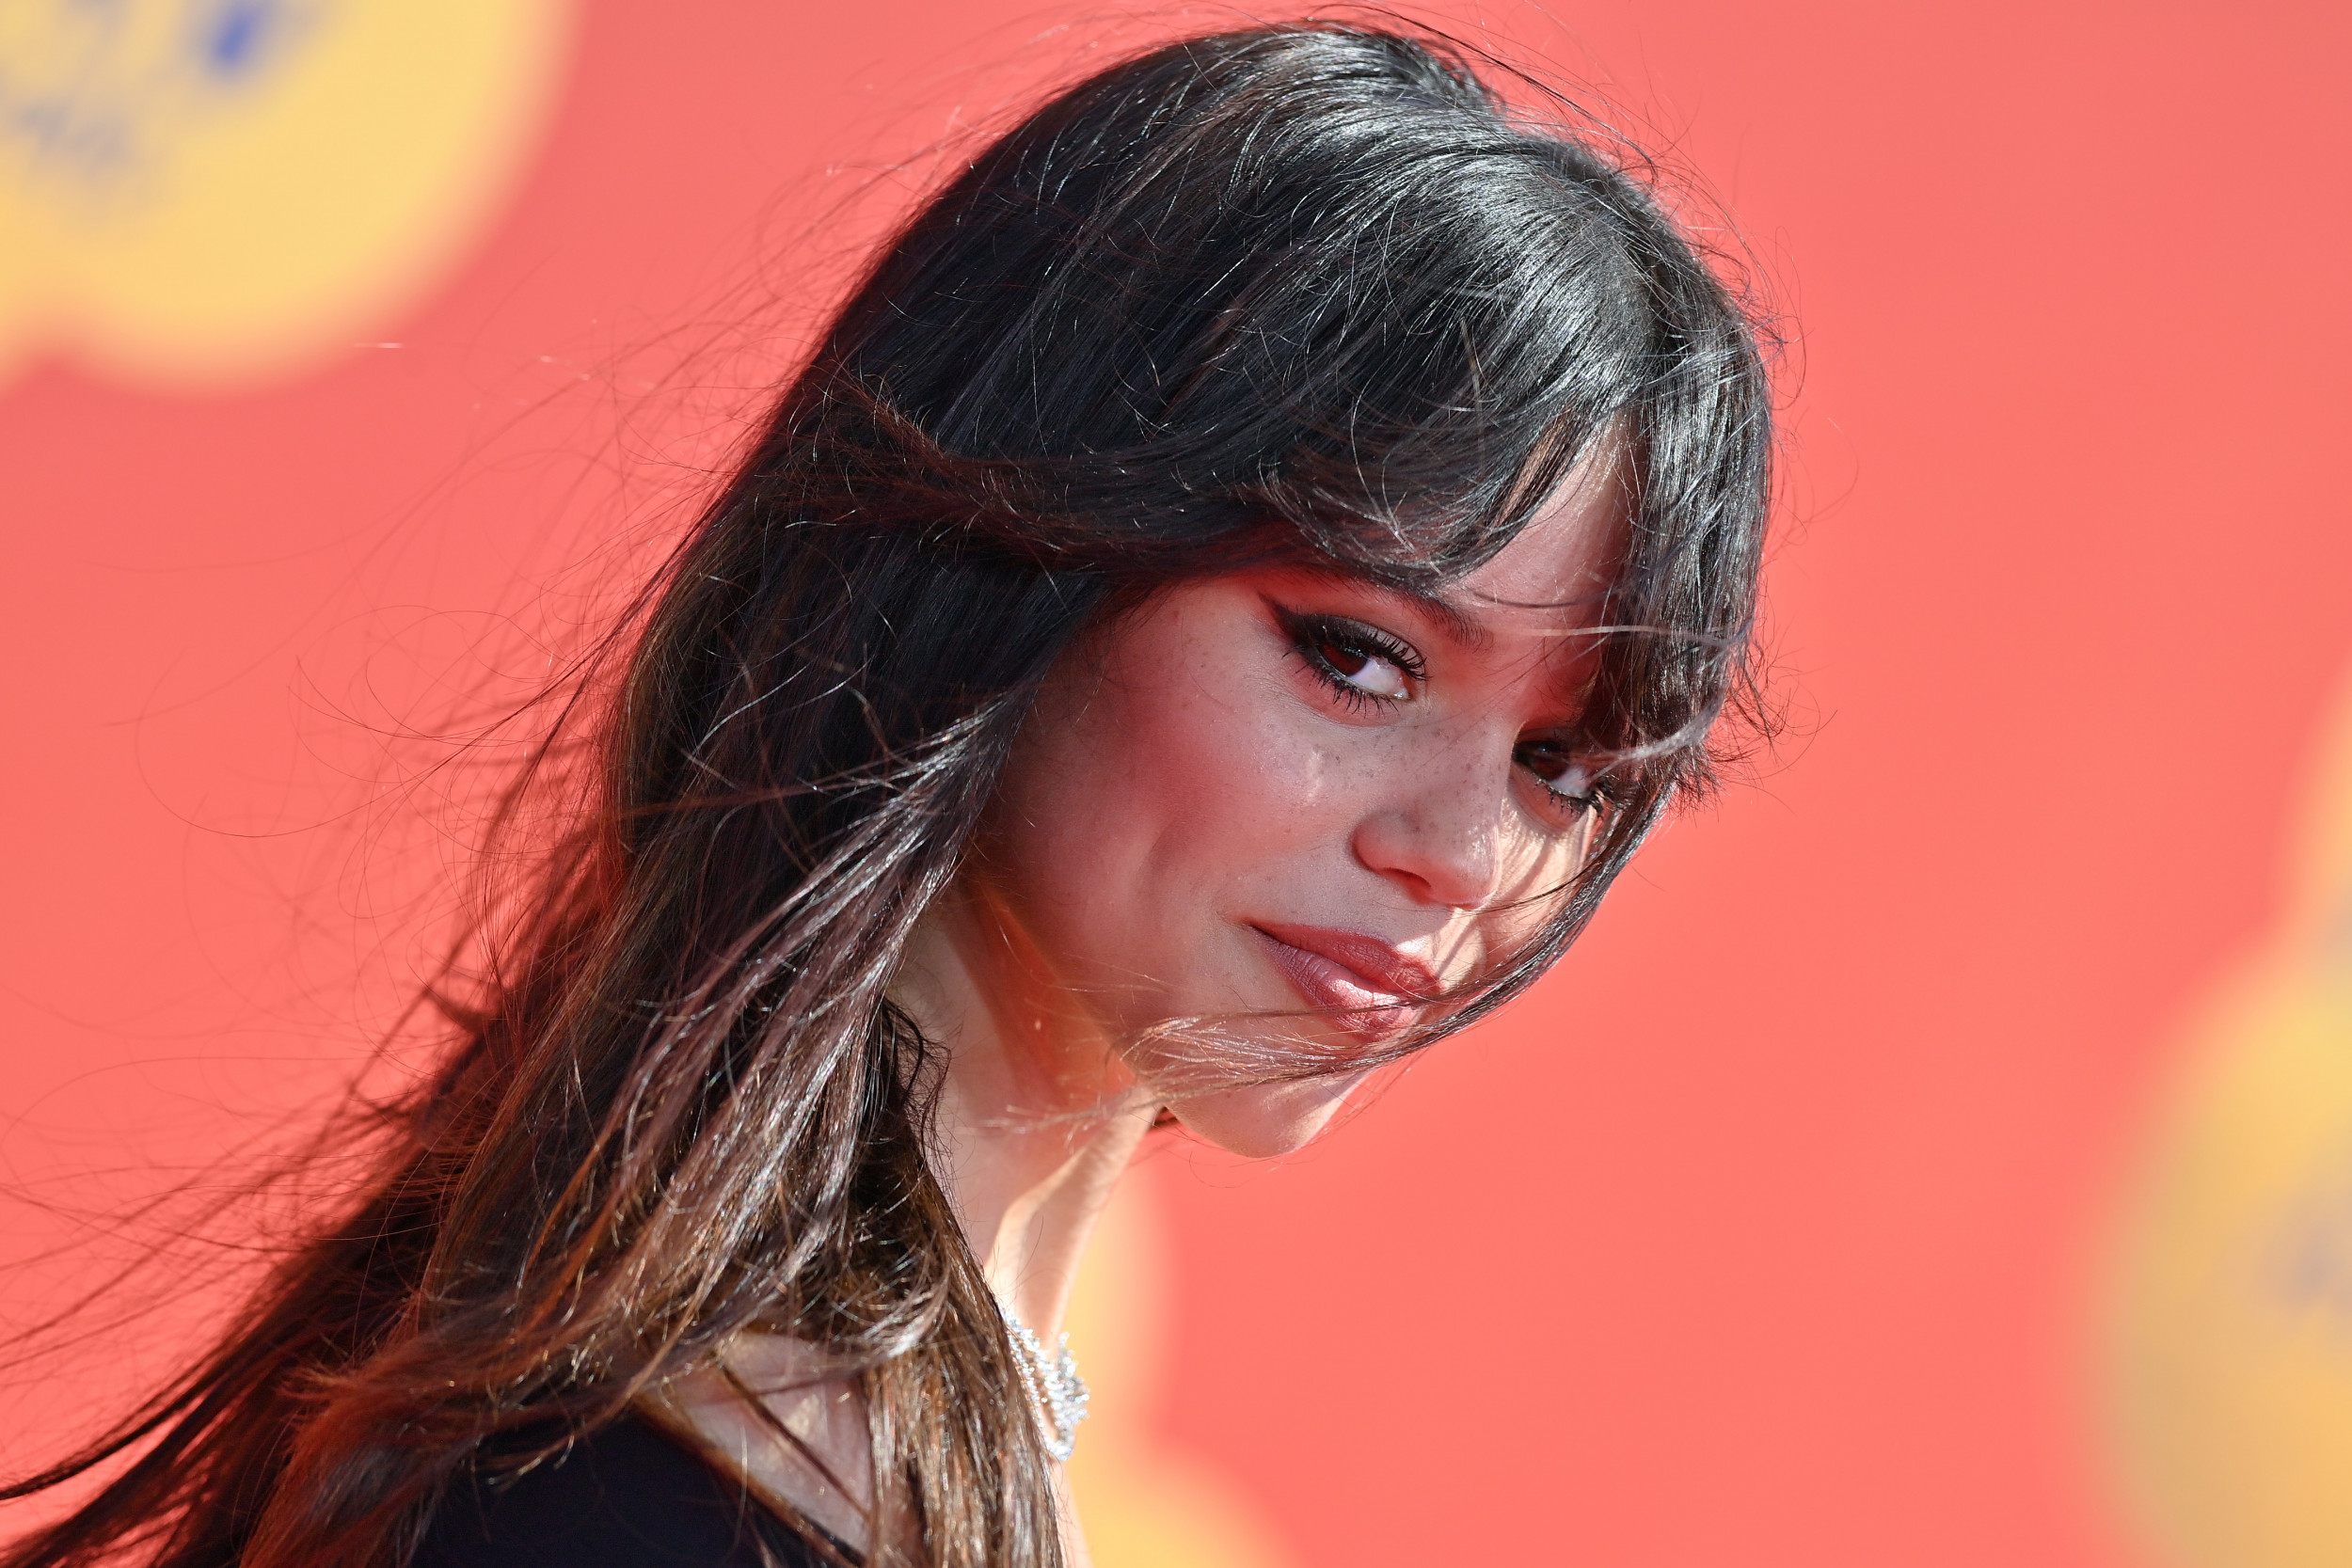 Who Is Jenna Ortega Everything You Need To Know About The Wednesday Star